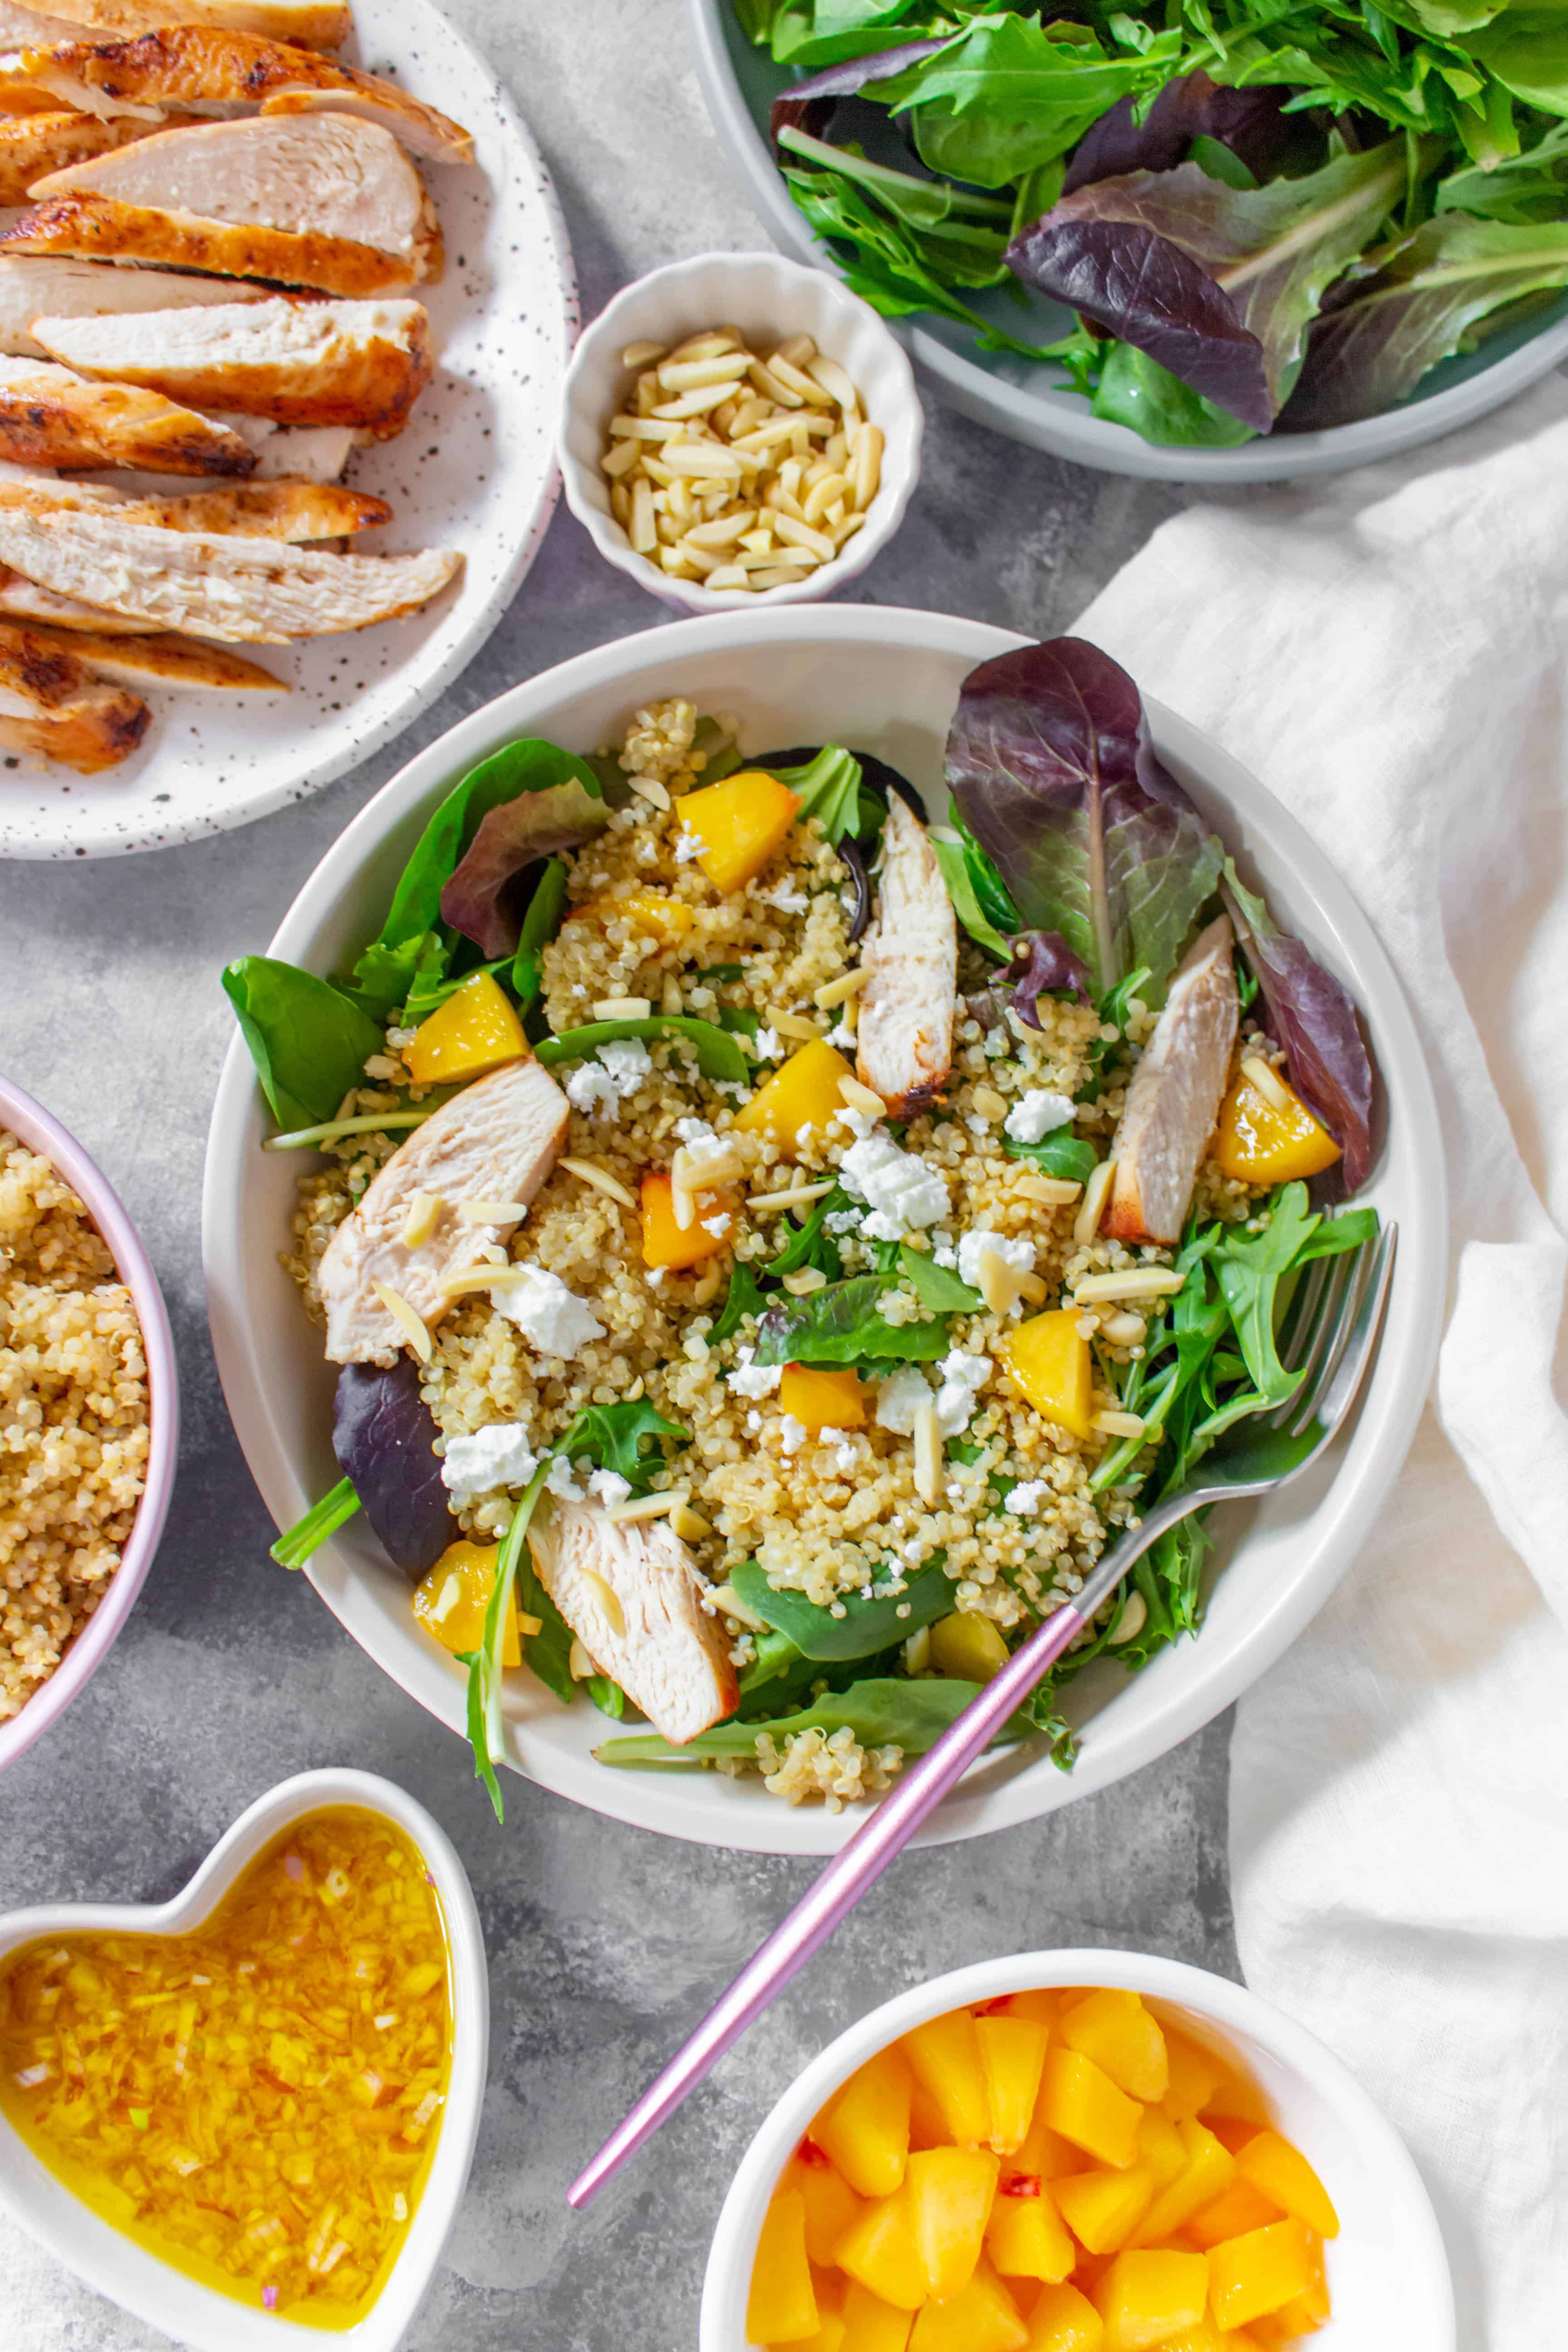 This Peach Quinoa Salad is the perfect cold lunch meal prep as well as being super easy to make for a large gathering! Look no further for a cold lunch idea than this sweet peachy salad.